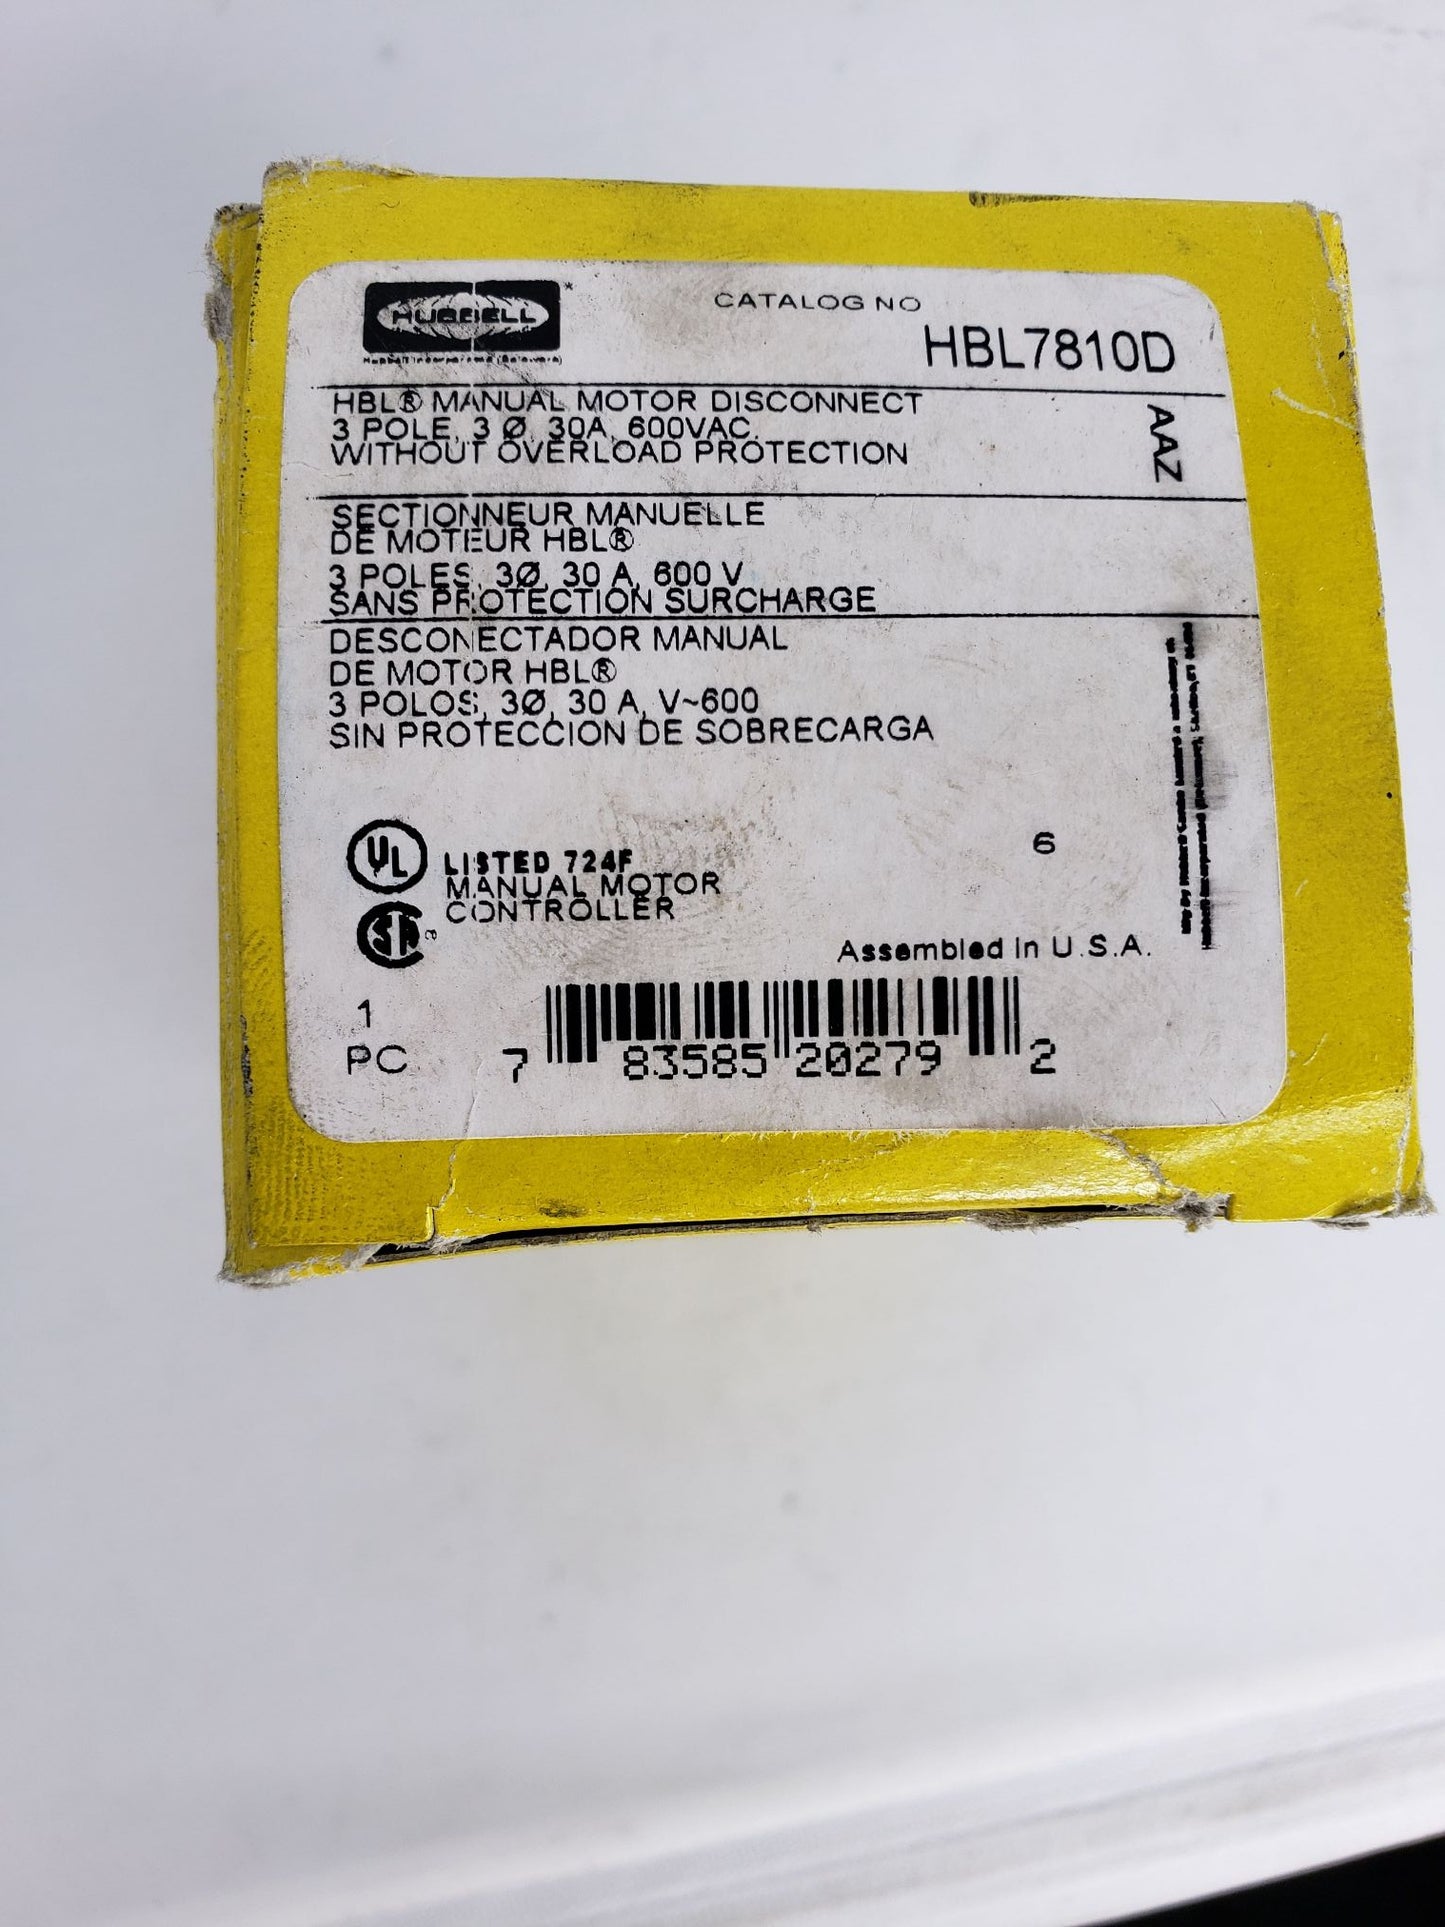 Hubbell HBL7810D Manual Motor Disconnect 3 Pole 600VAC 1 PCS New Condition